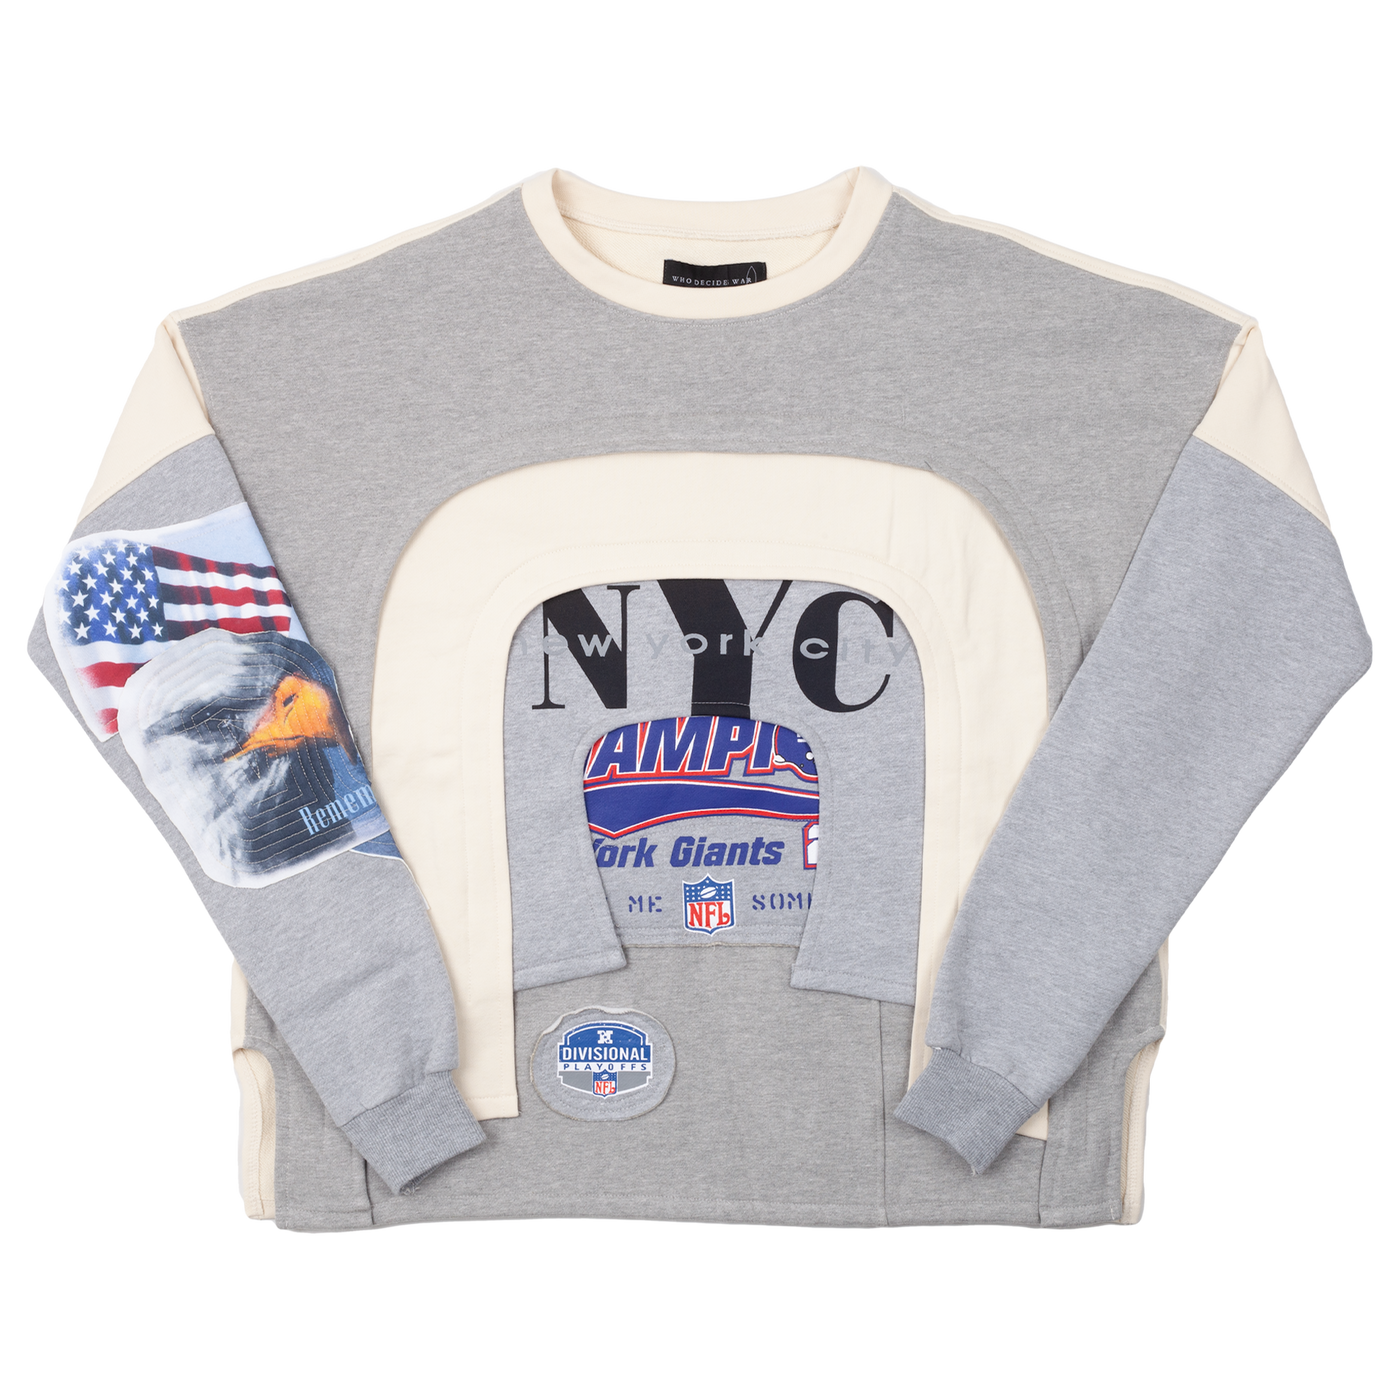 WHO DECIDES WAR ARCHED COLLAGE CREWNECK SWEATER